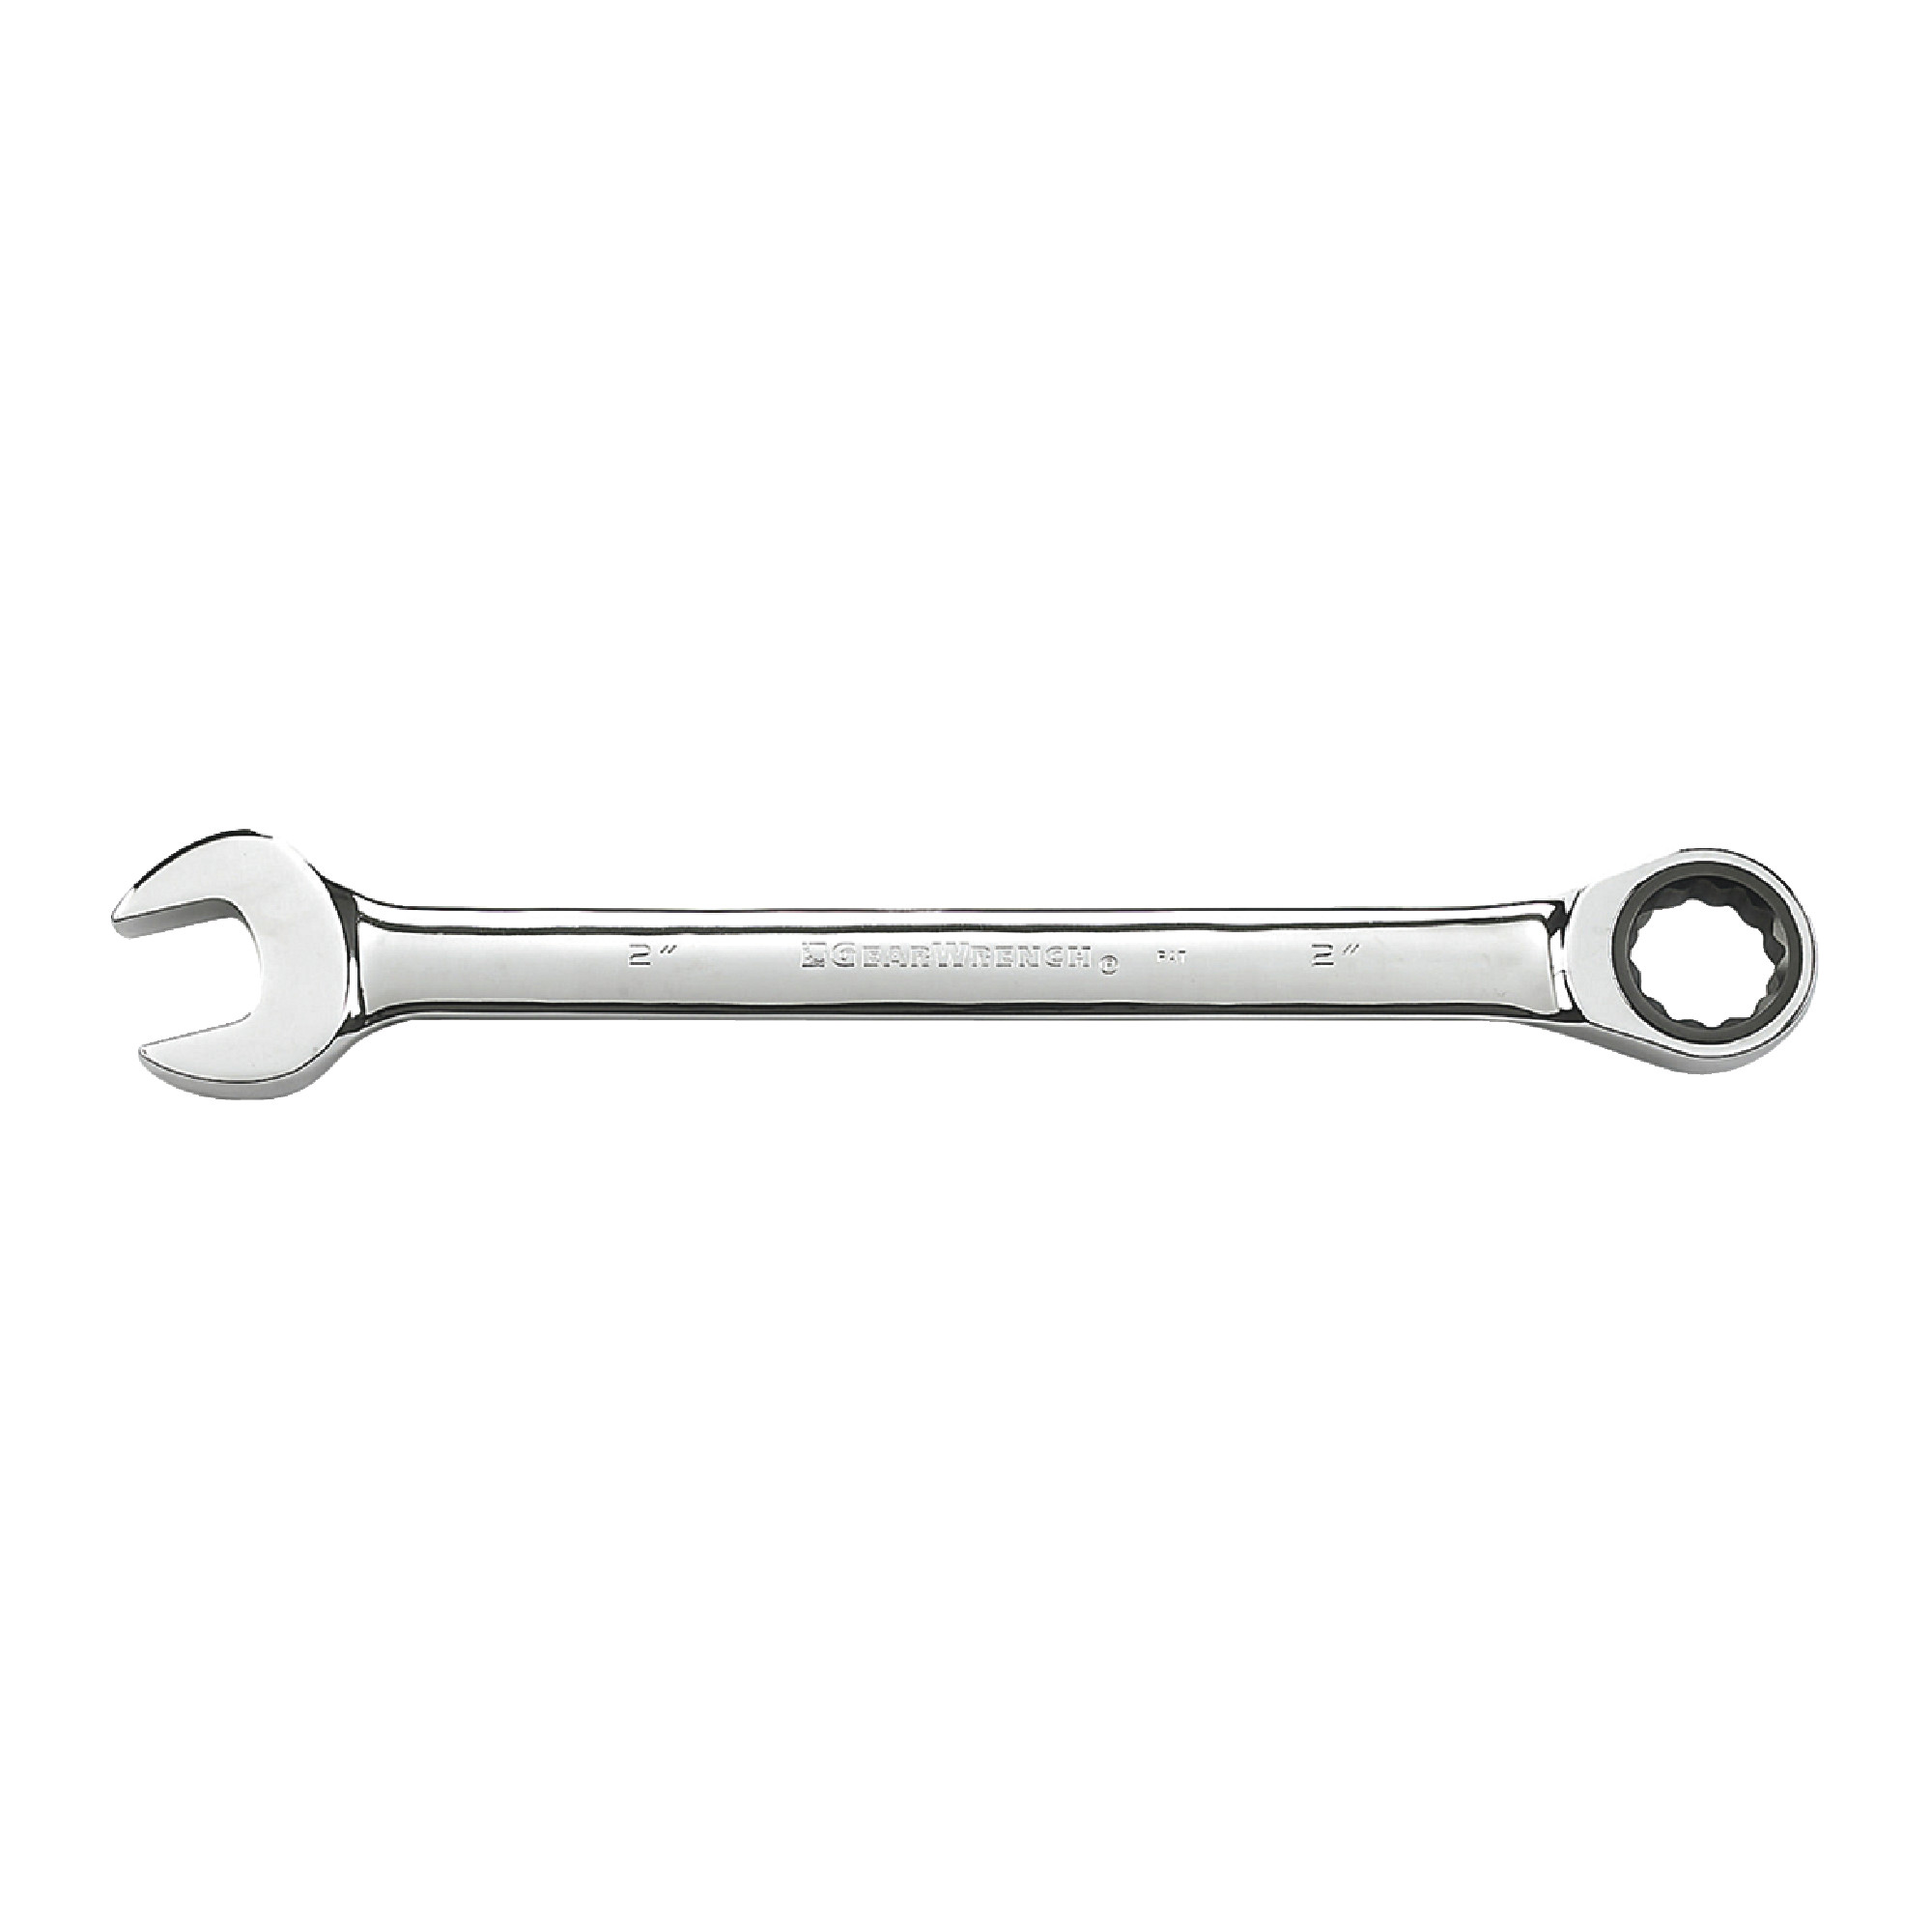 1-1/16" 12 Point Ratcheting Combination Wrench